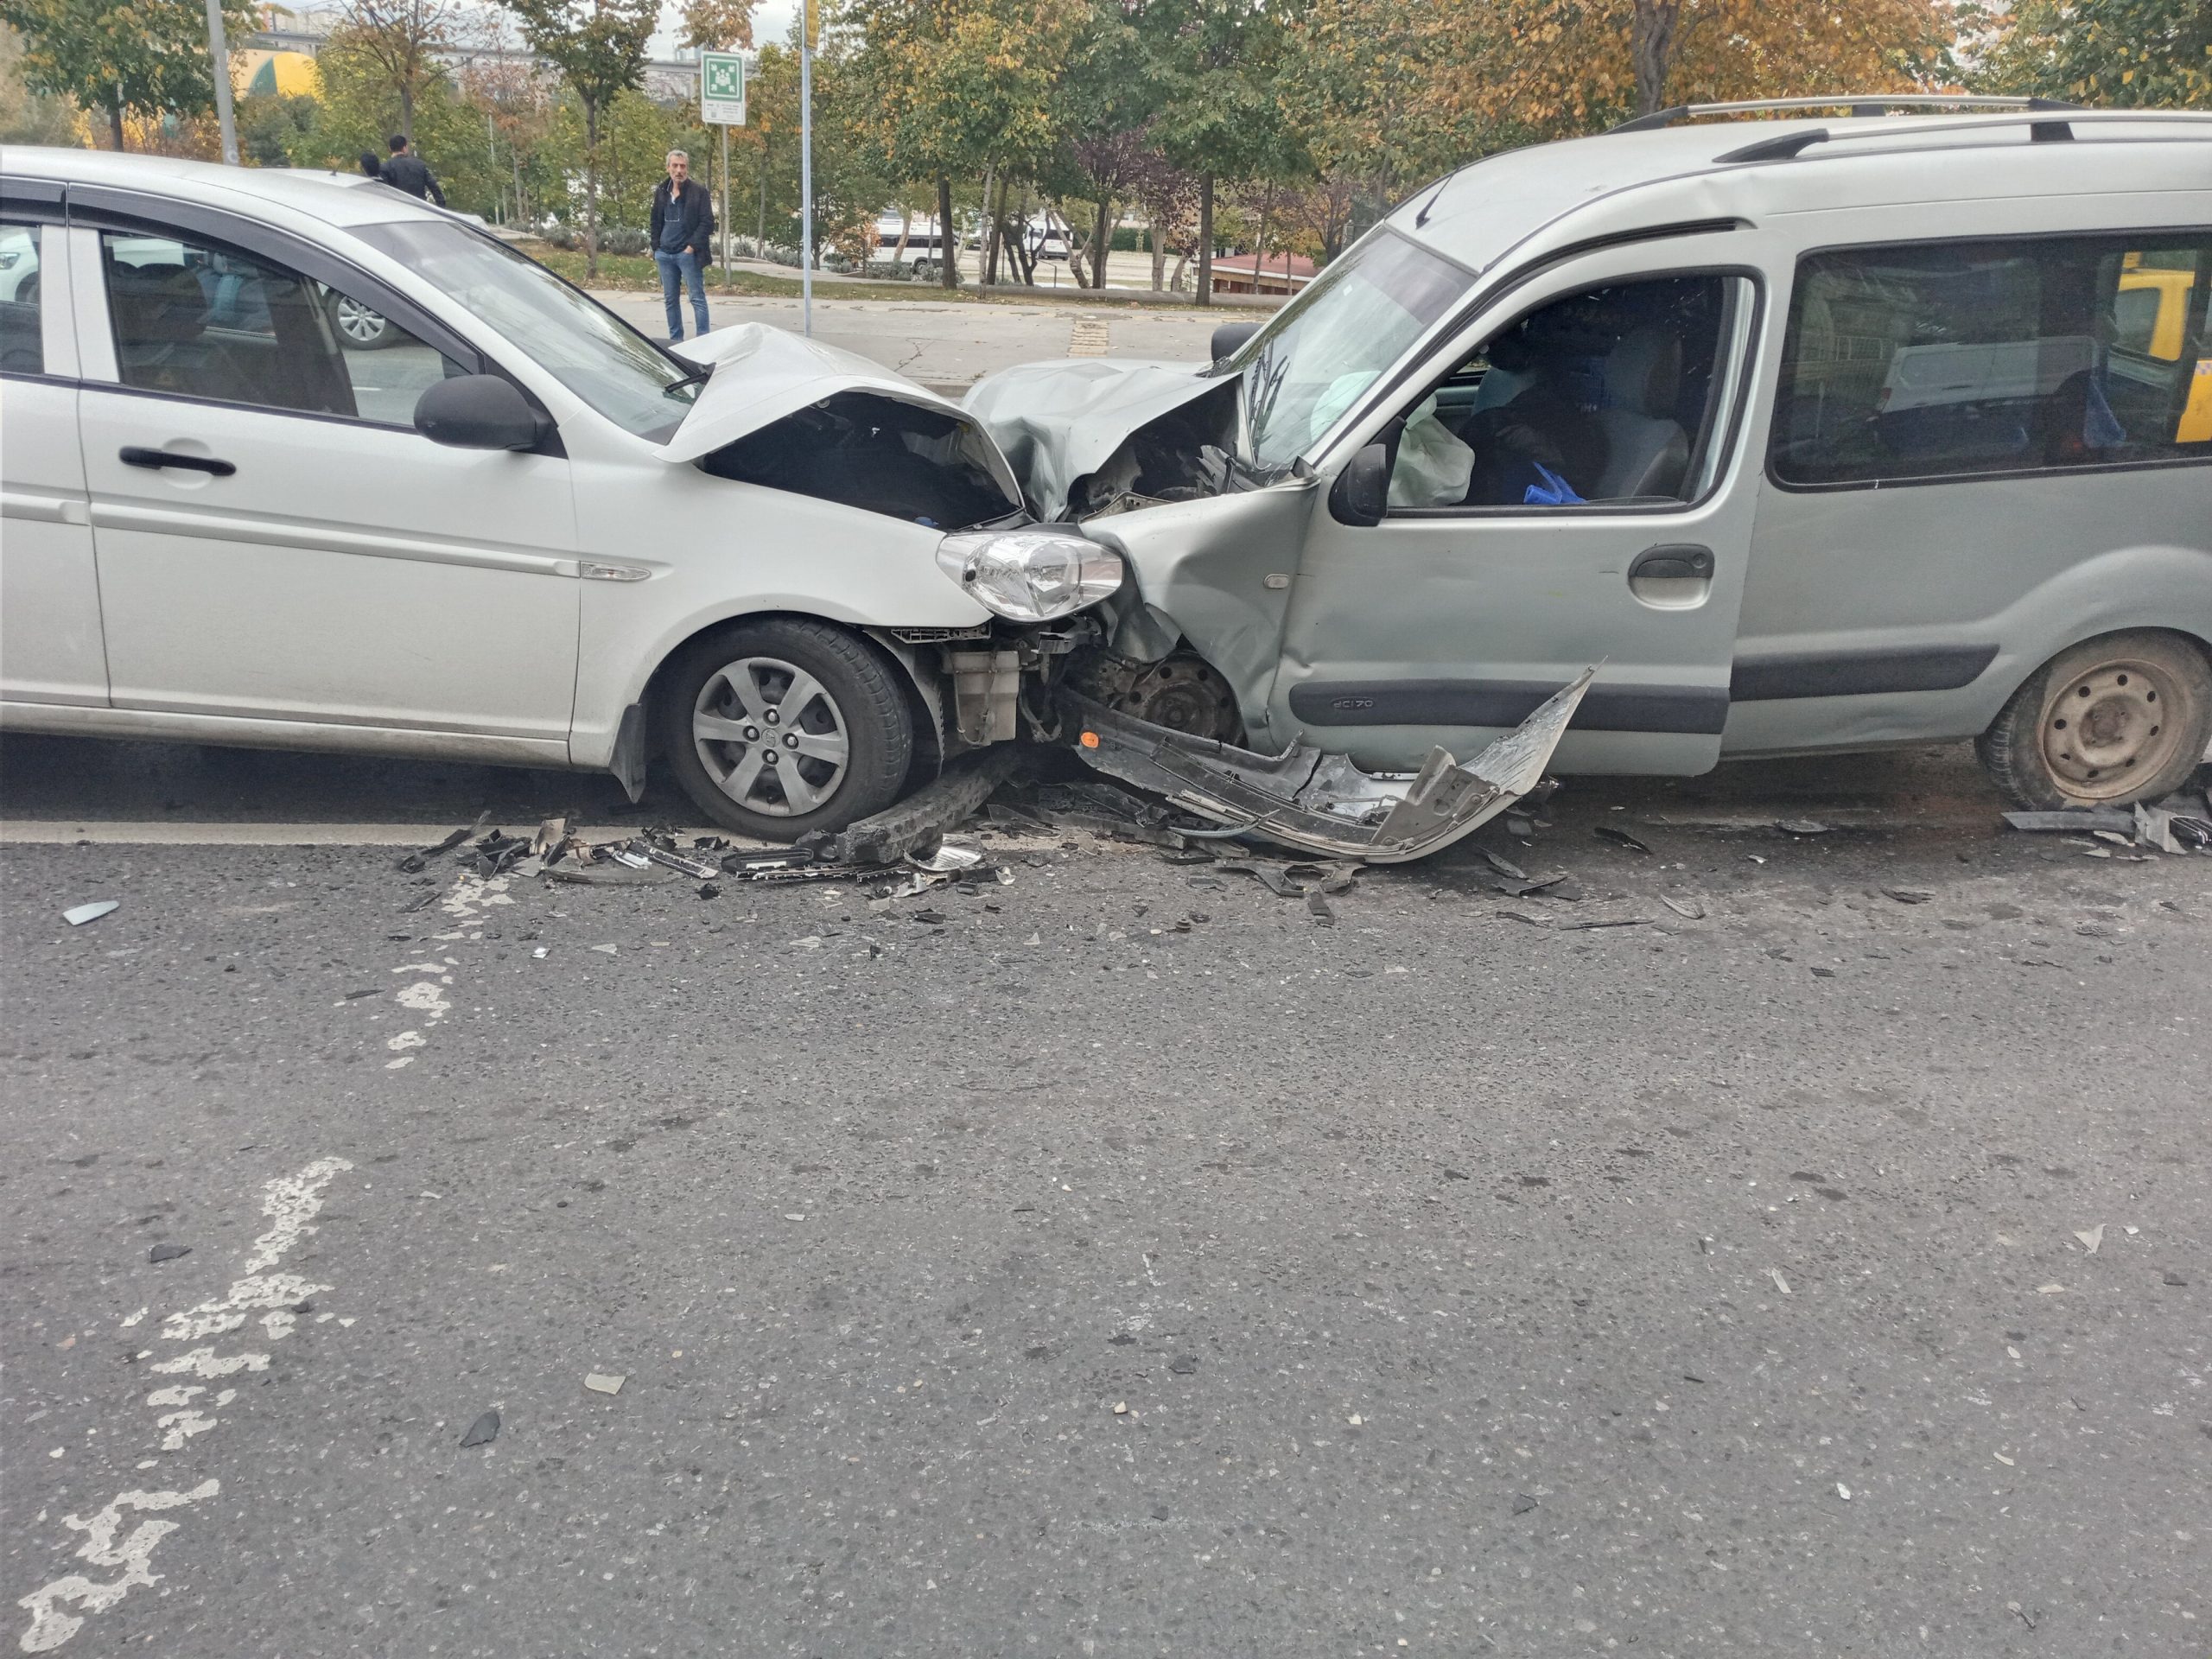 CCTV shows road accident in Istanbul - IHA News